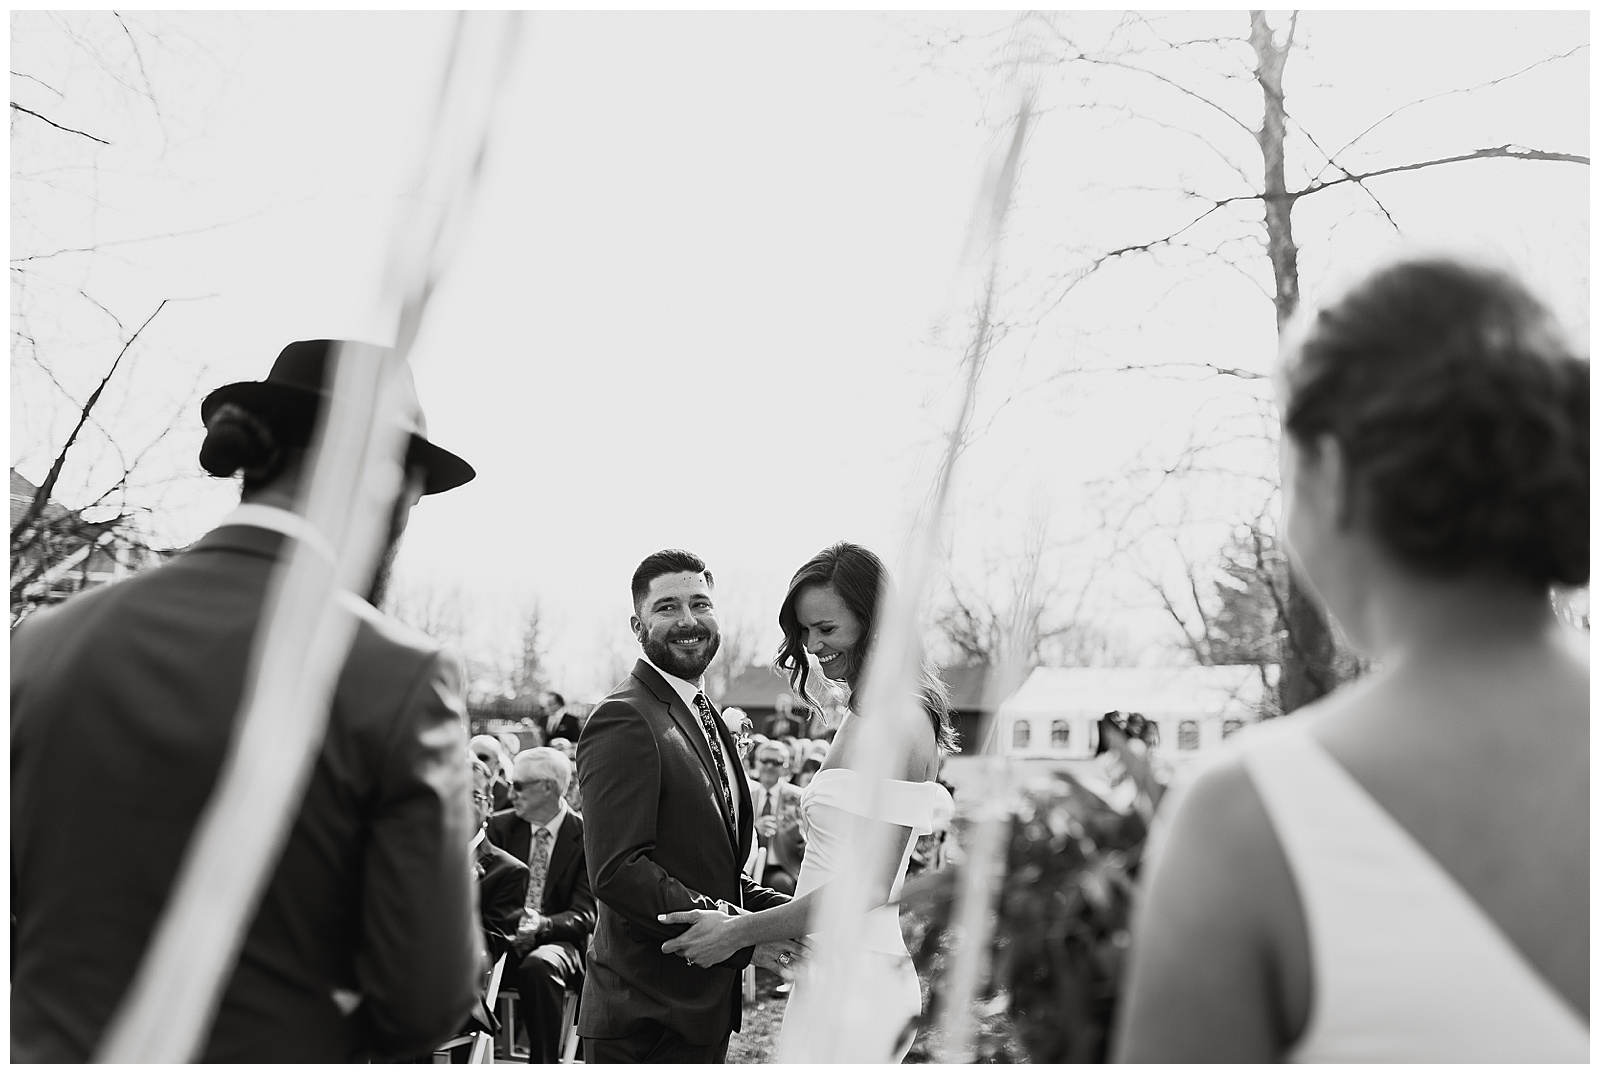 Jenny and Andrew share some newlywed joy and laughter at their bohemian alter. 